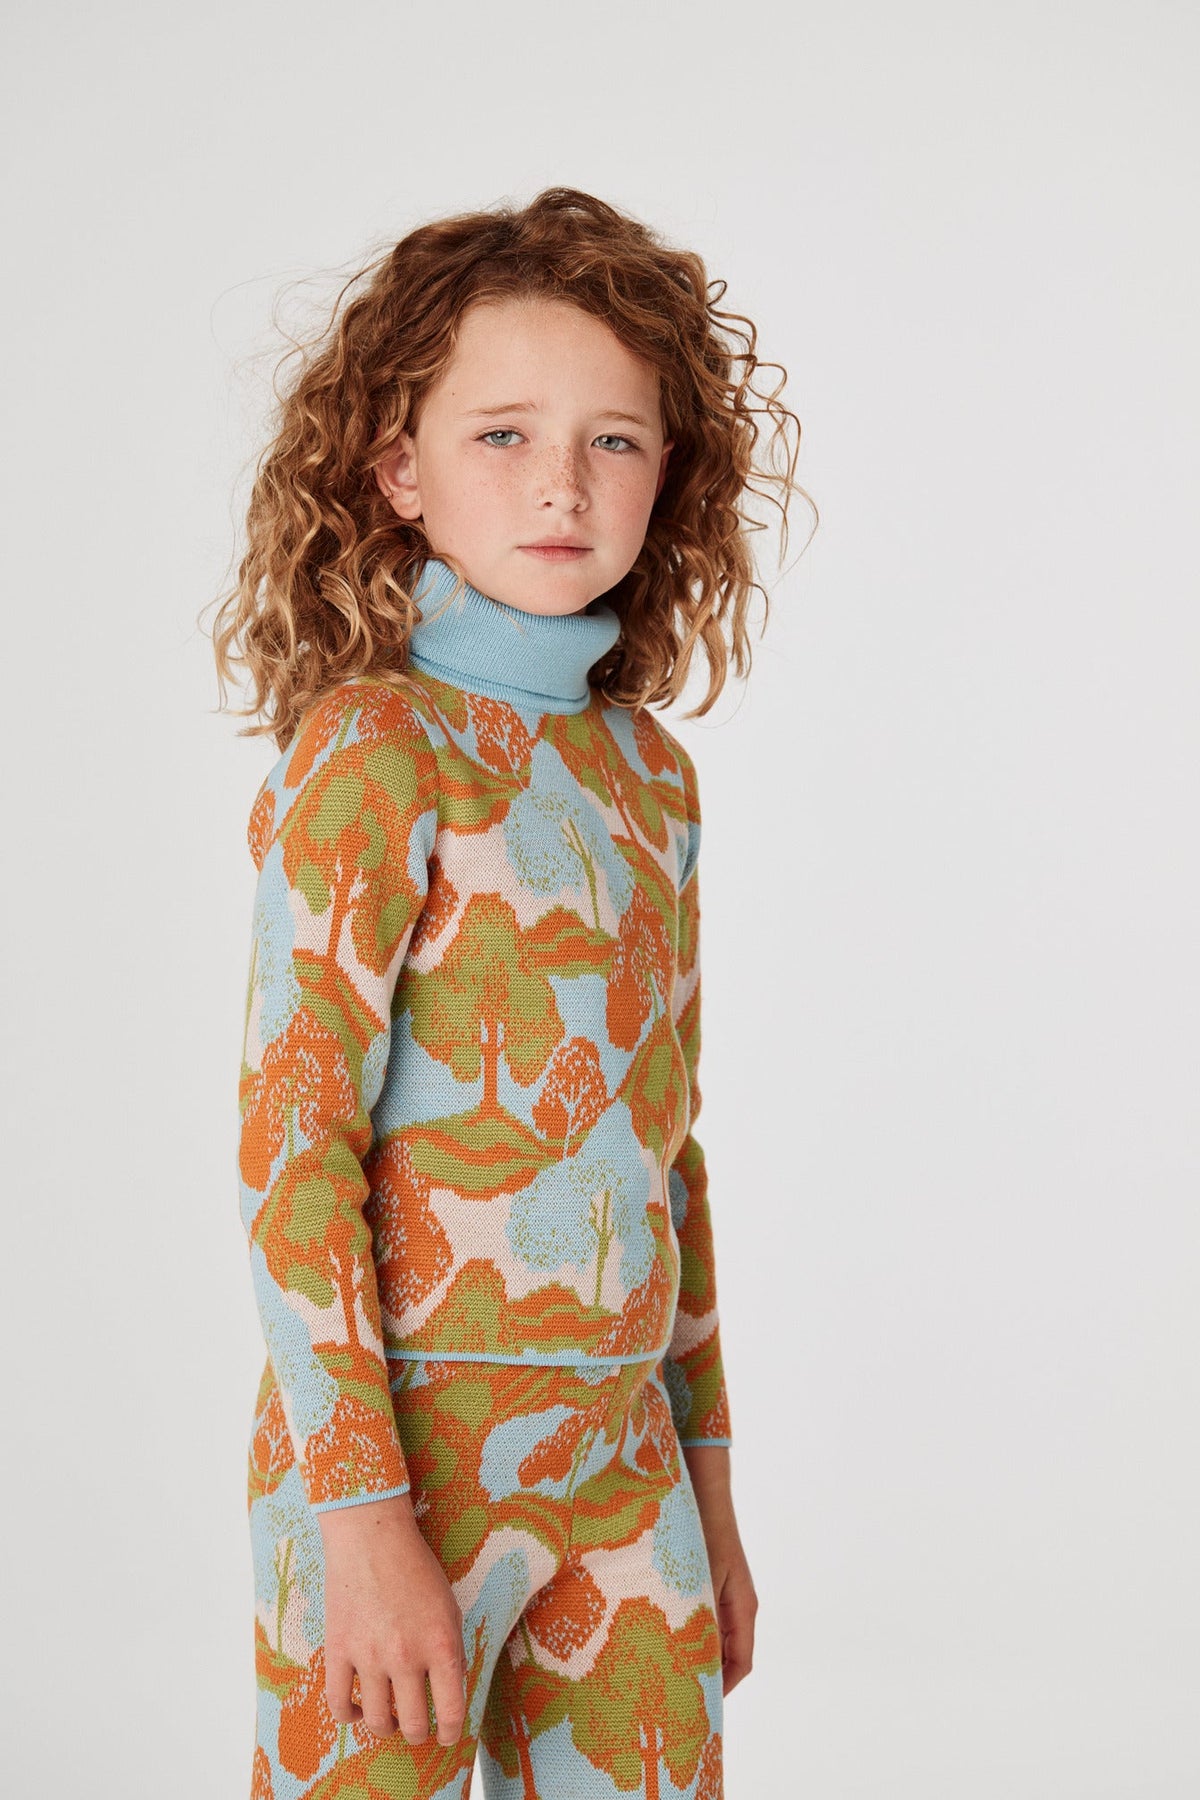 Jacquard Turtleneck - Dune Landscape+Model is 53 inches tall, 58lbs, wearing a size 7-8y